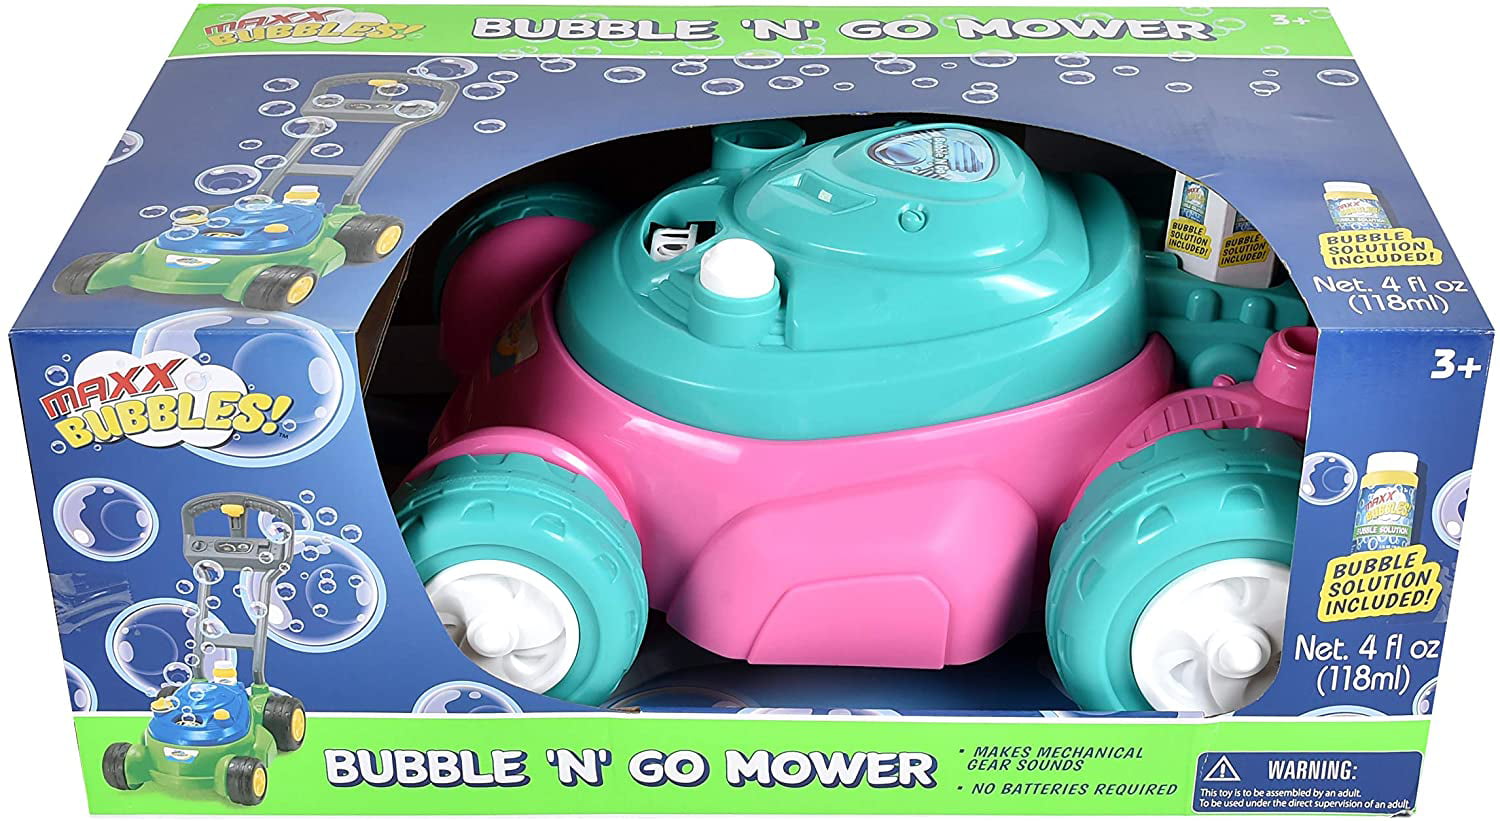 Pink Maxx Bubbles Bubble-N-Go Toy Mower with Refill Solution